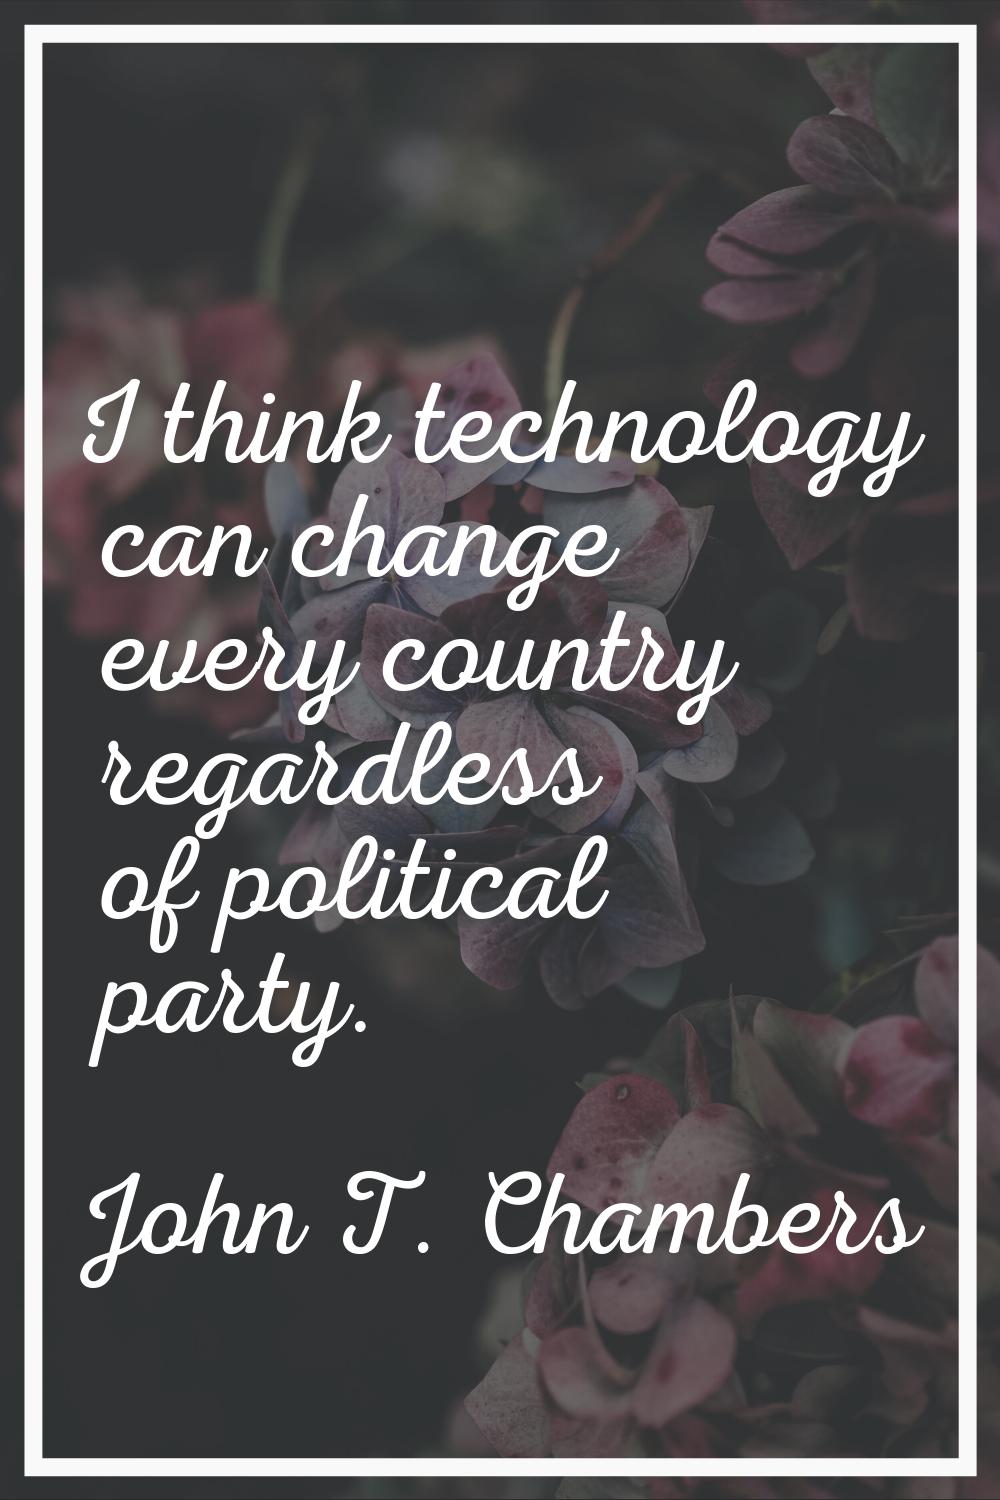 I think technology can change every country regardless of political party.